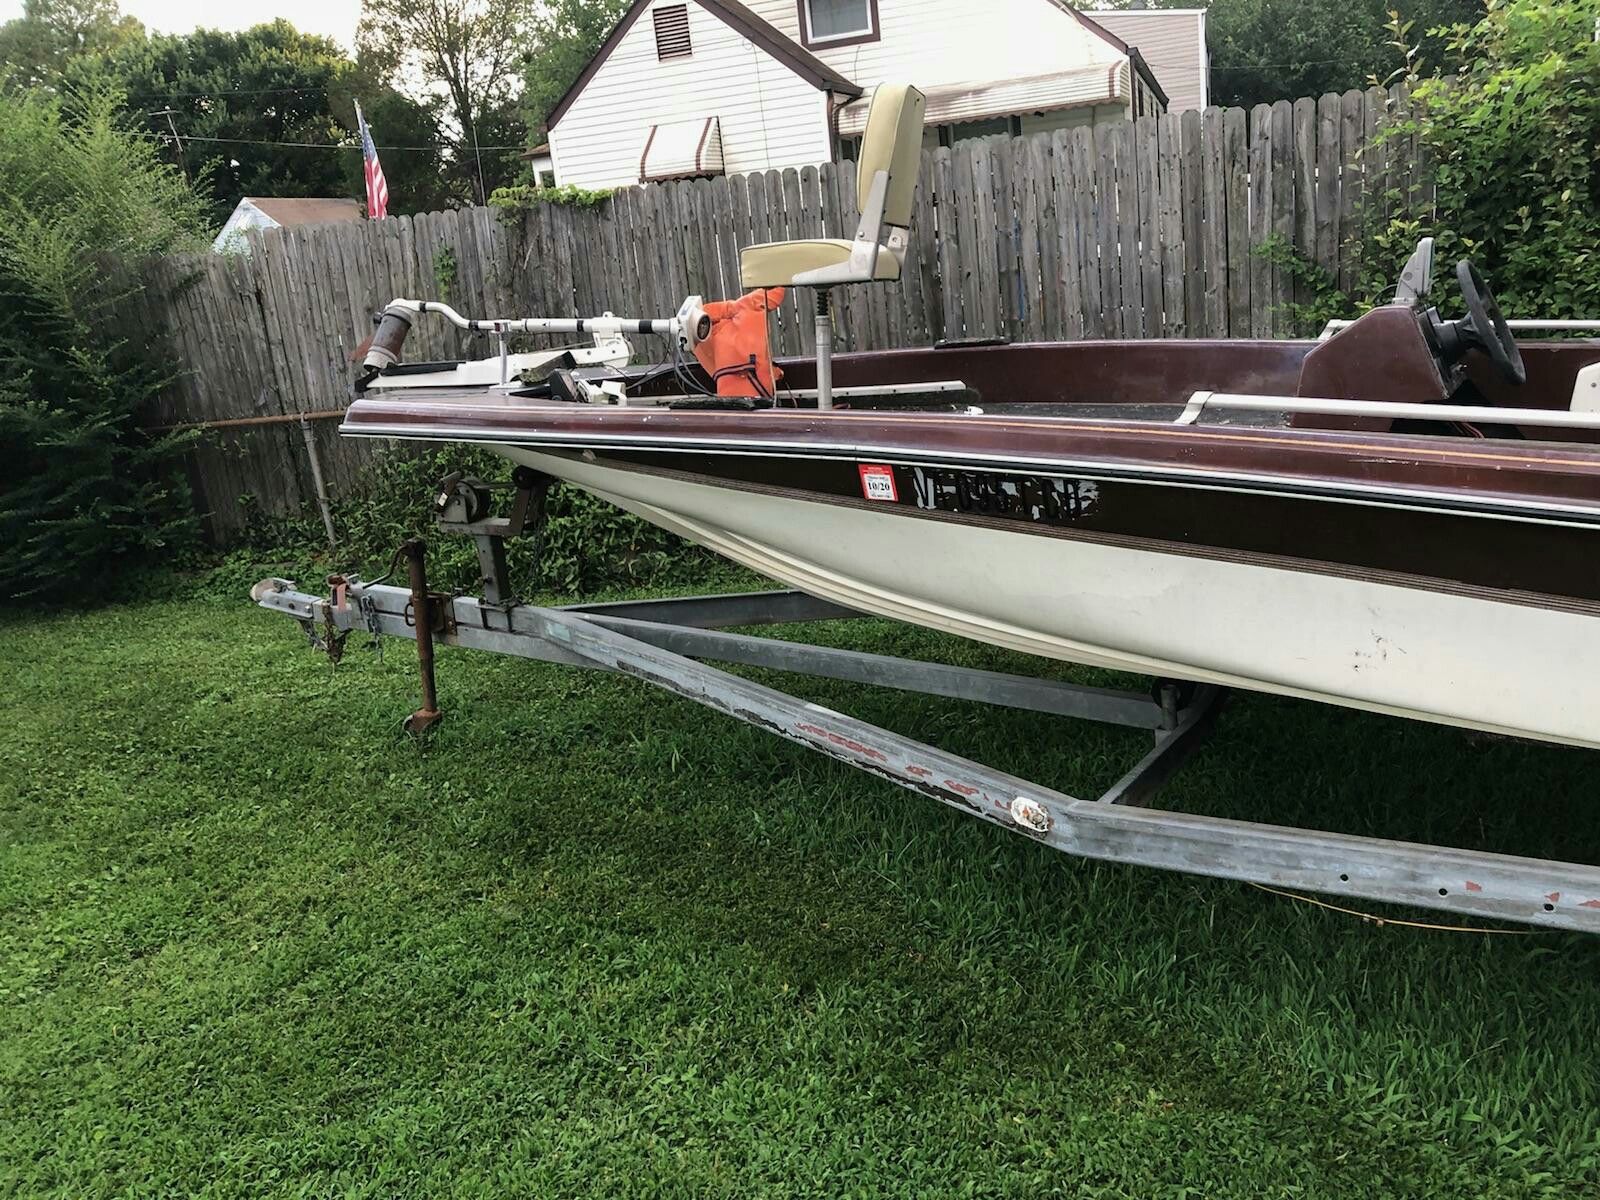 1978 Hurst Bass Boat $700 obo, needs a little work , has 150 HP motor, looks nice , callme at 757-266-306